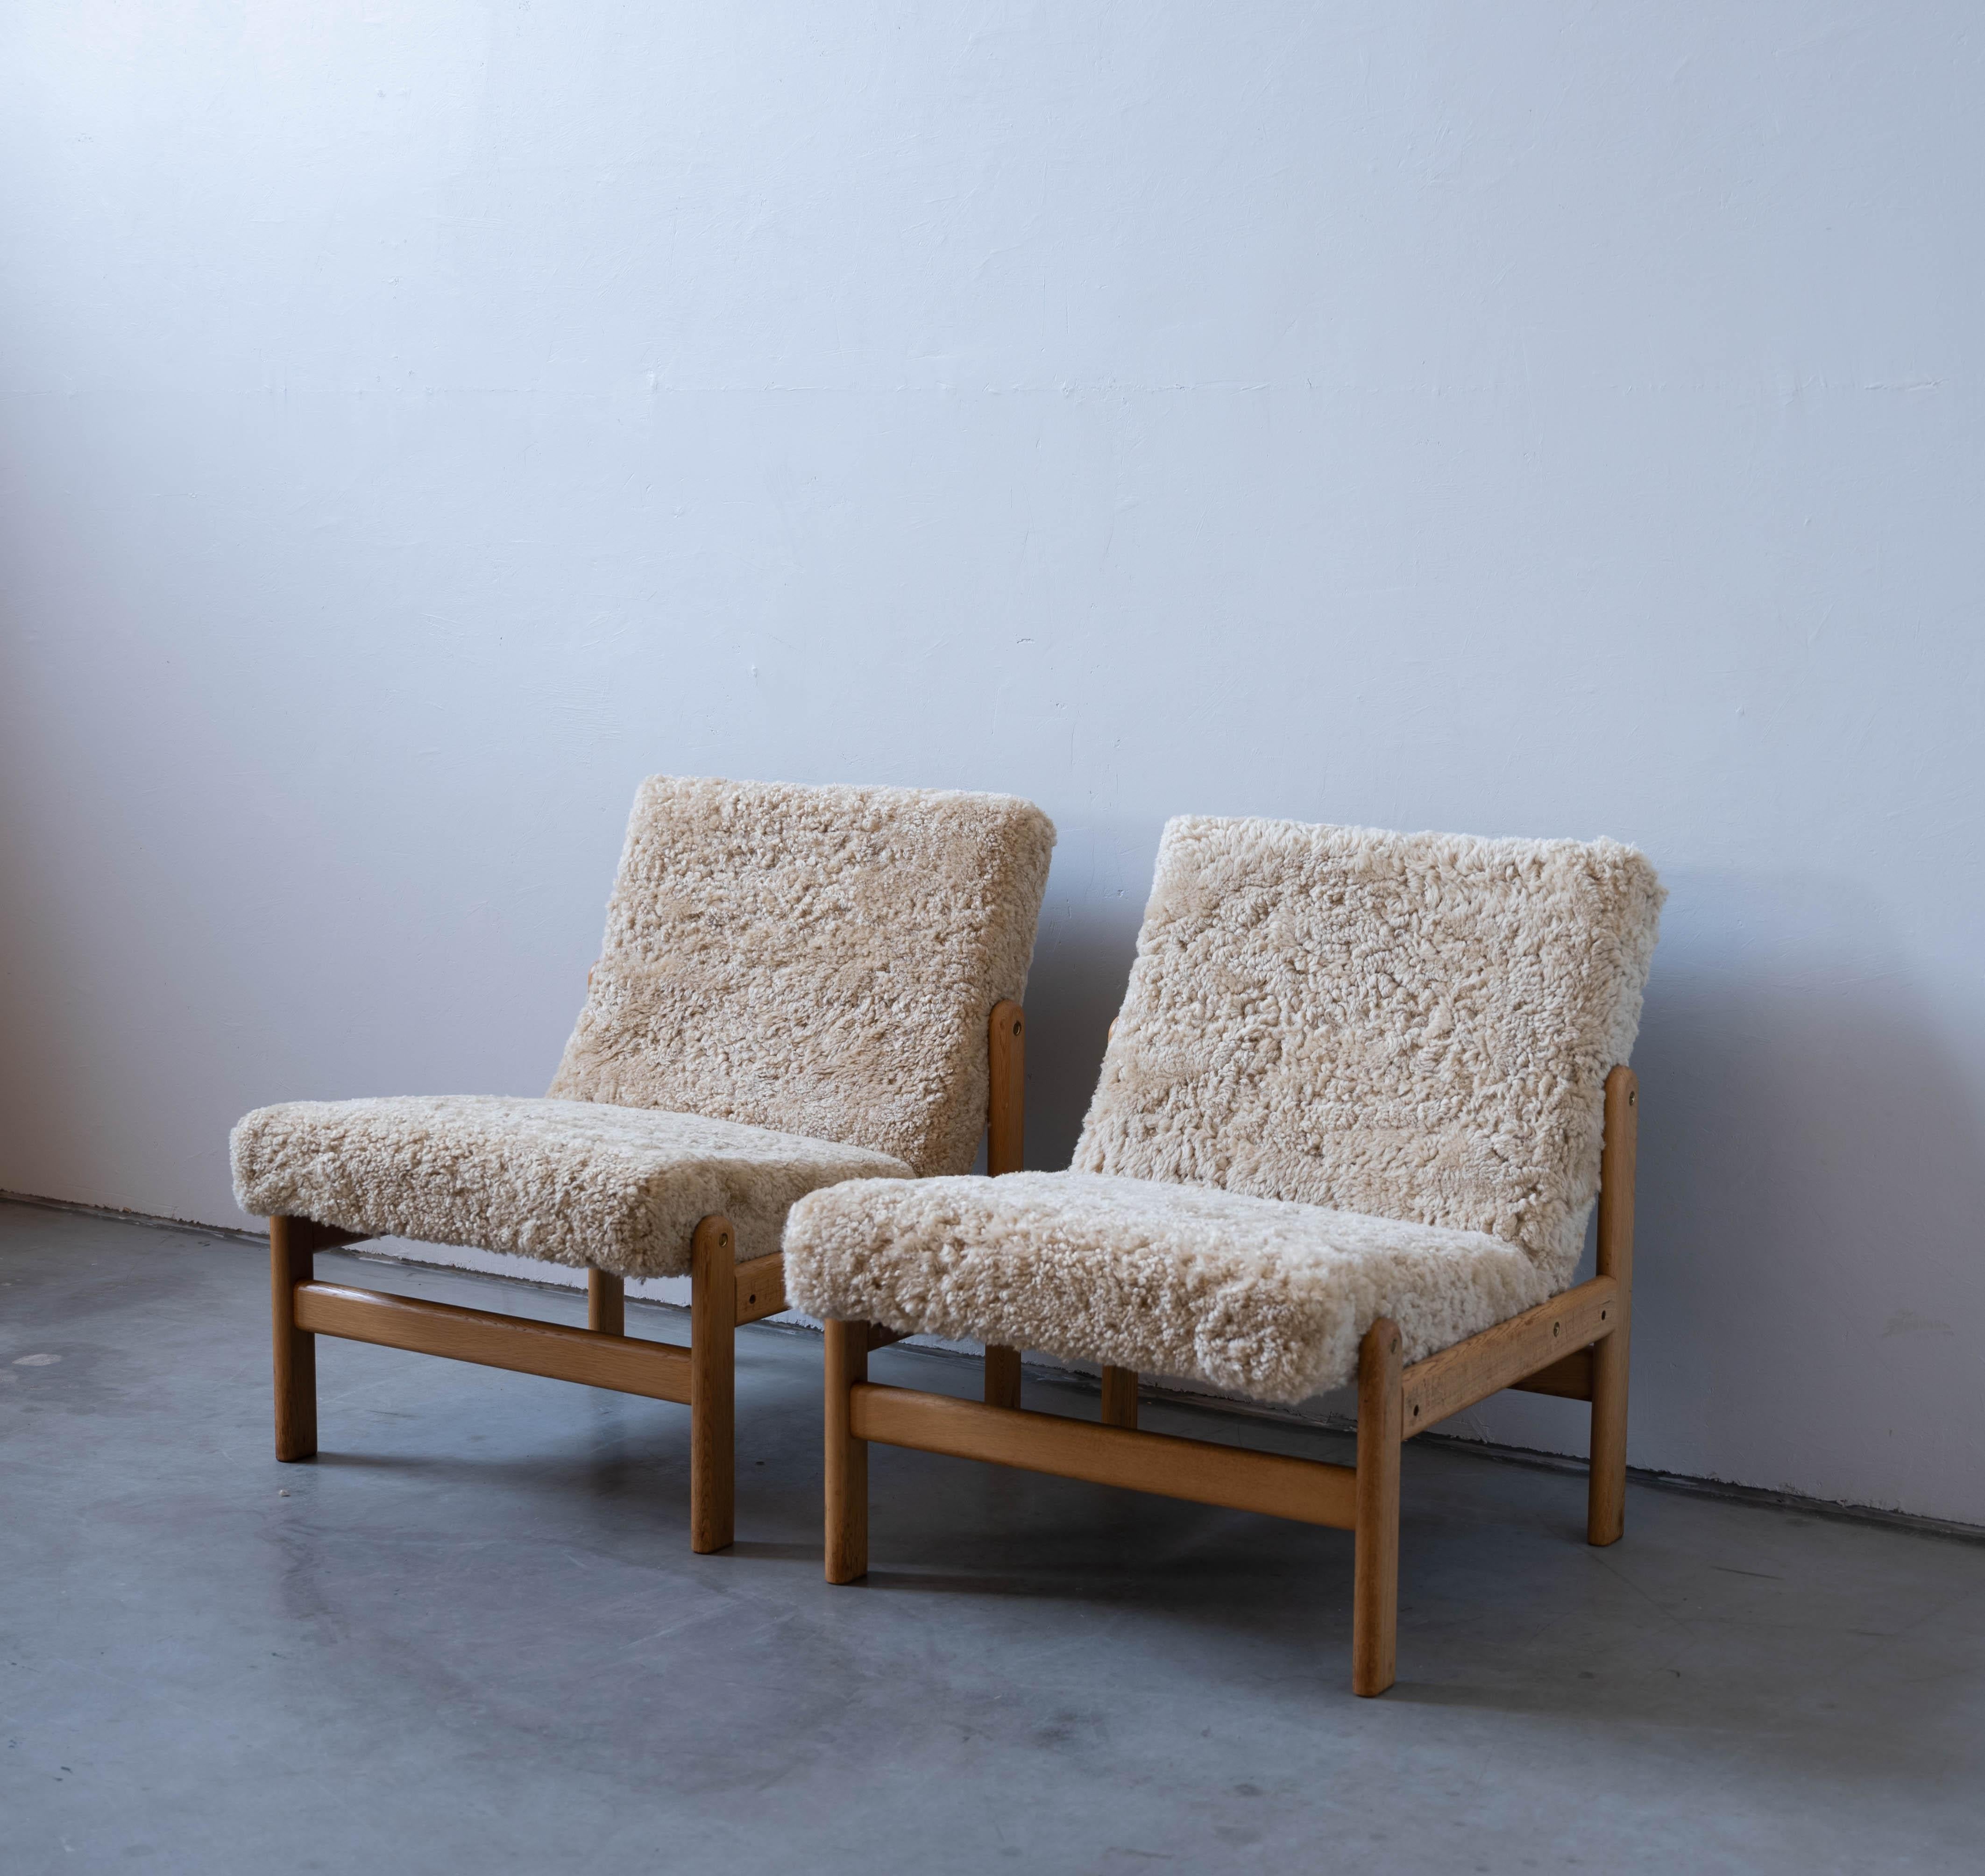 A pair of oak and shearling / sheepskin slipper chairs designed by Jørgen Bækmark for FDB Møbler, Denmark, 1950s. 

Present pair was produced for and used in Kerteminde Town Hall.

